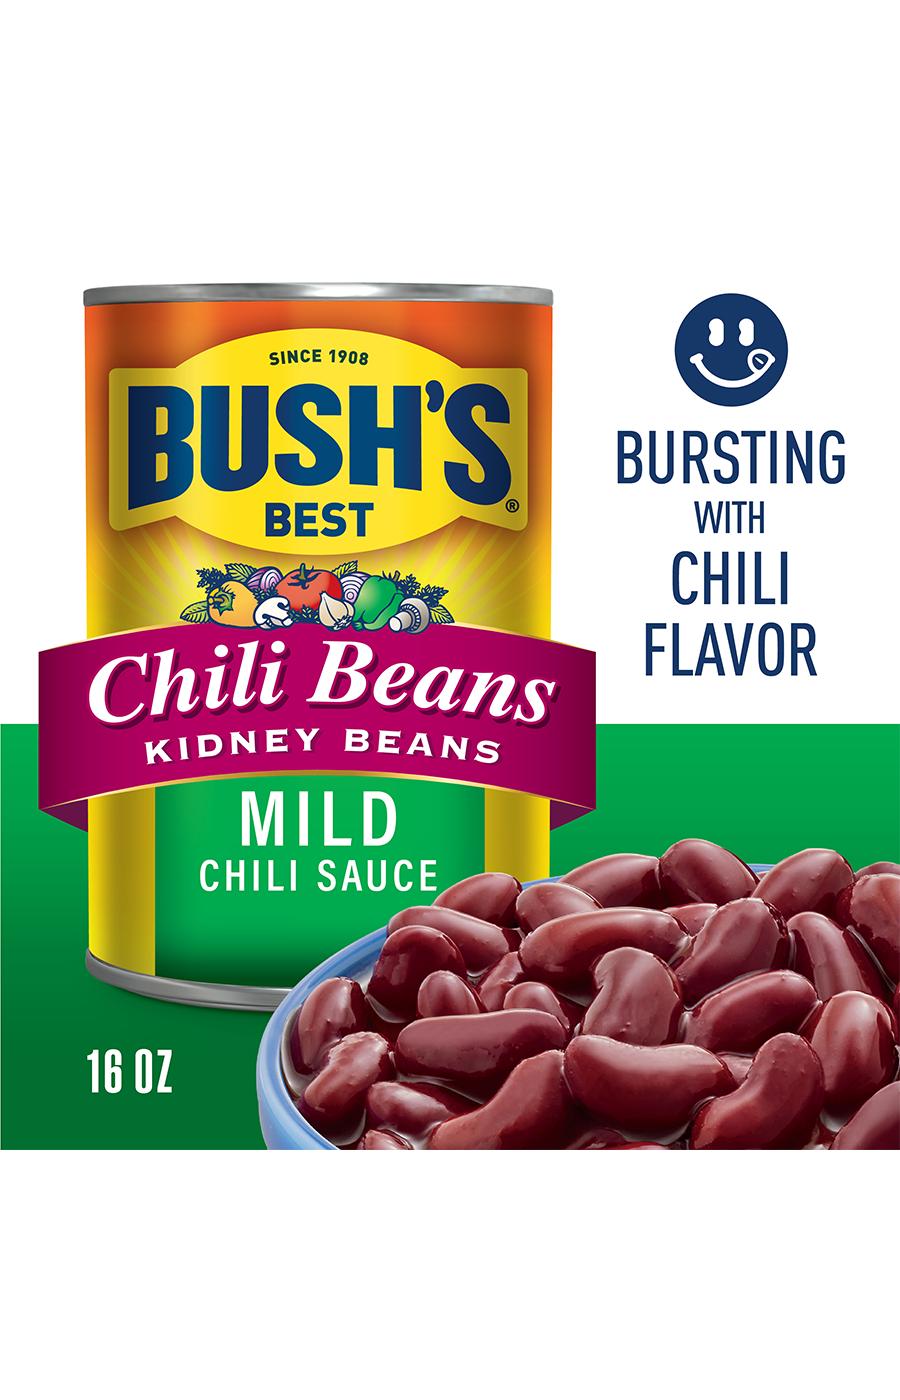 Bush's Best Kidney Beans in a Mild Chili Sauce; image 3 of 5